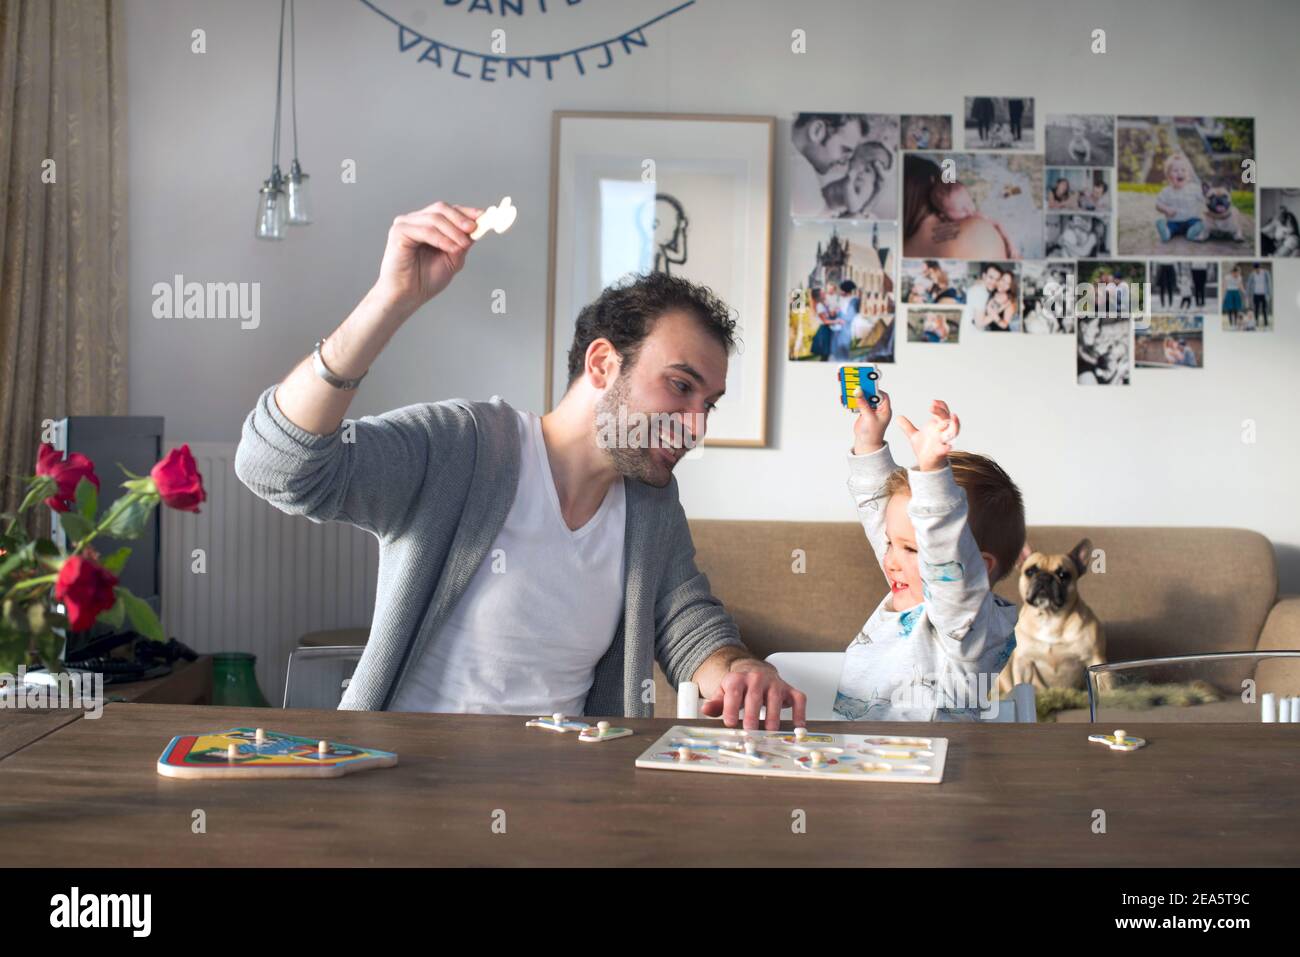 DAILY LIFE EVERYDAY FAMILY TIME Stock Photo